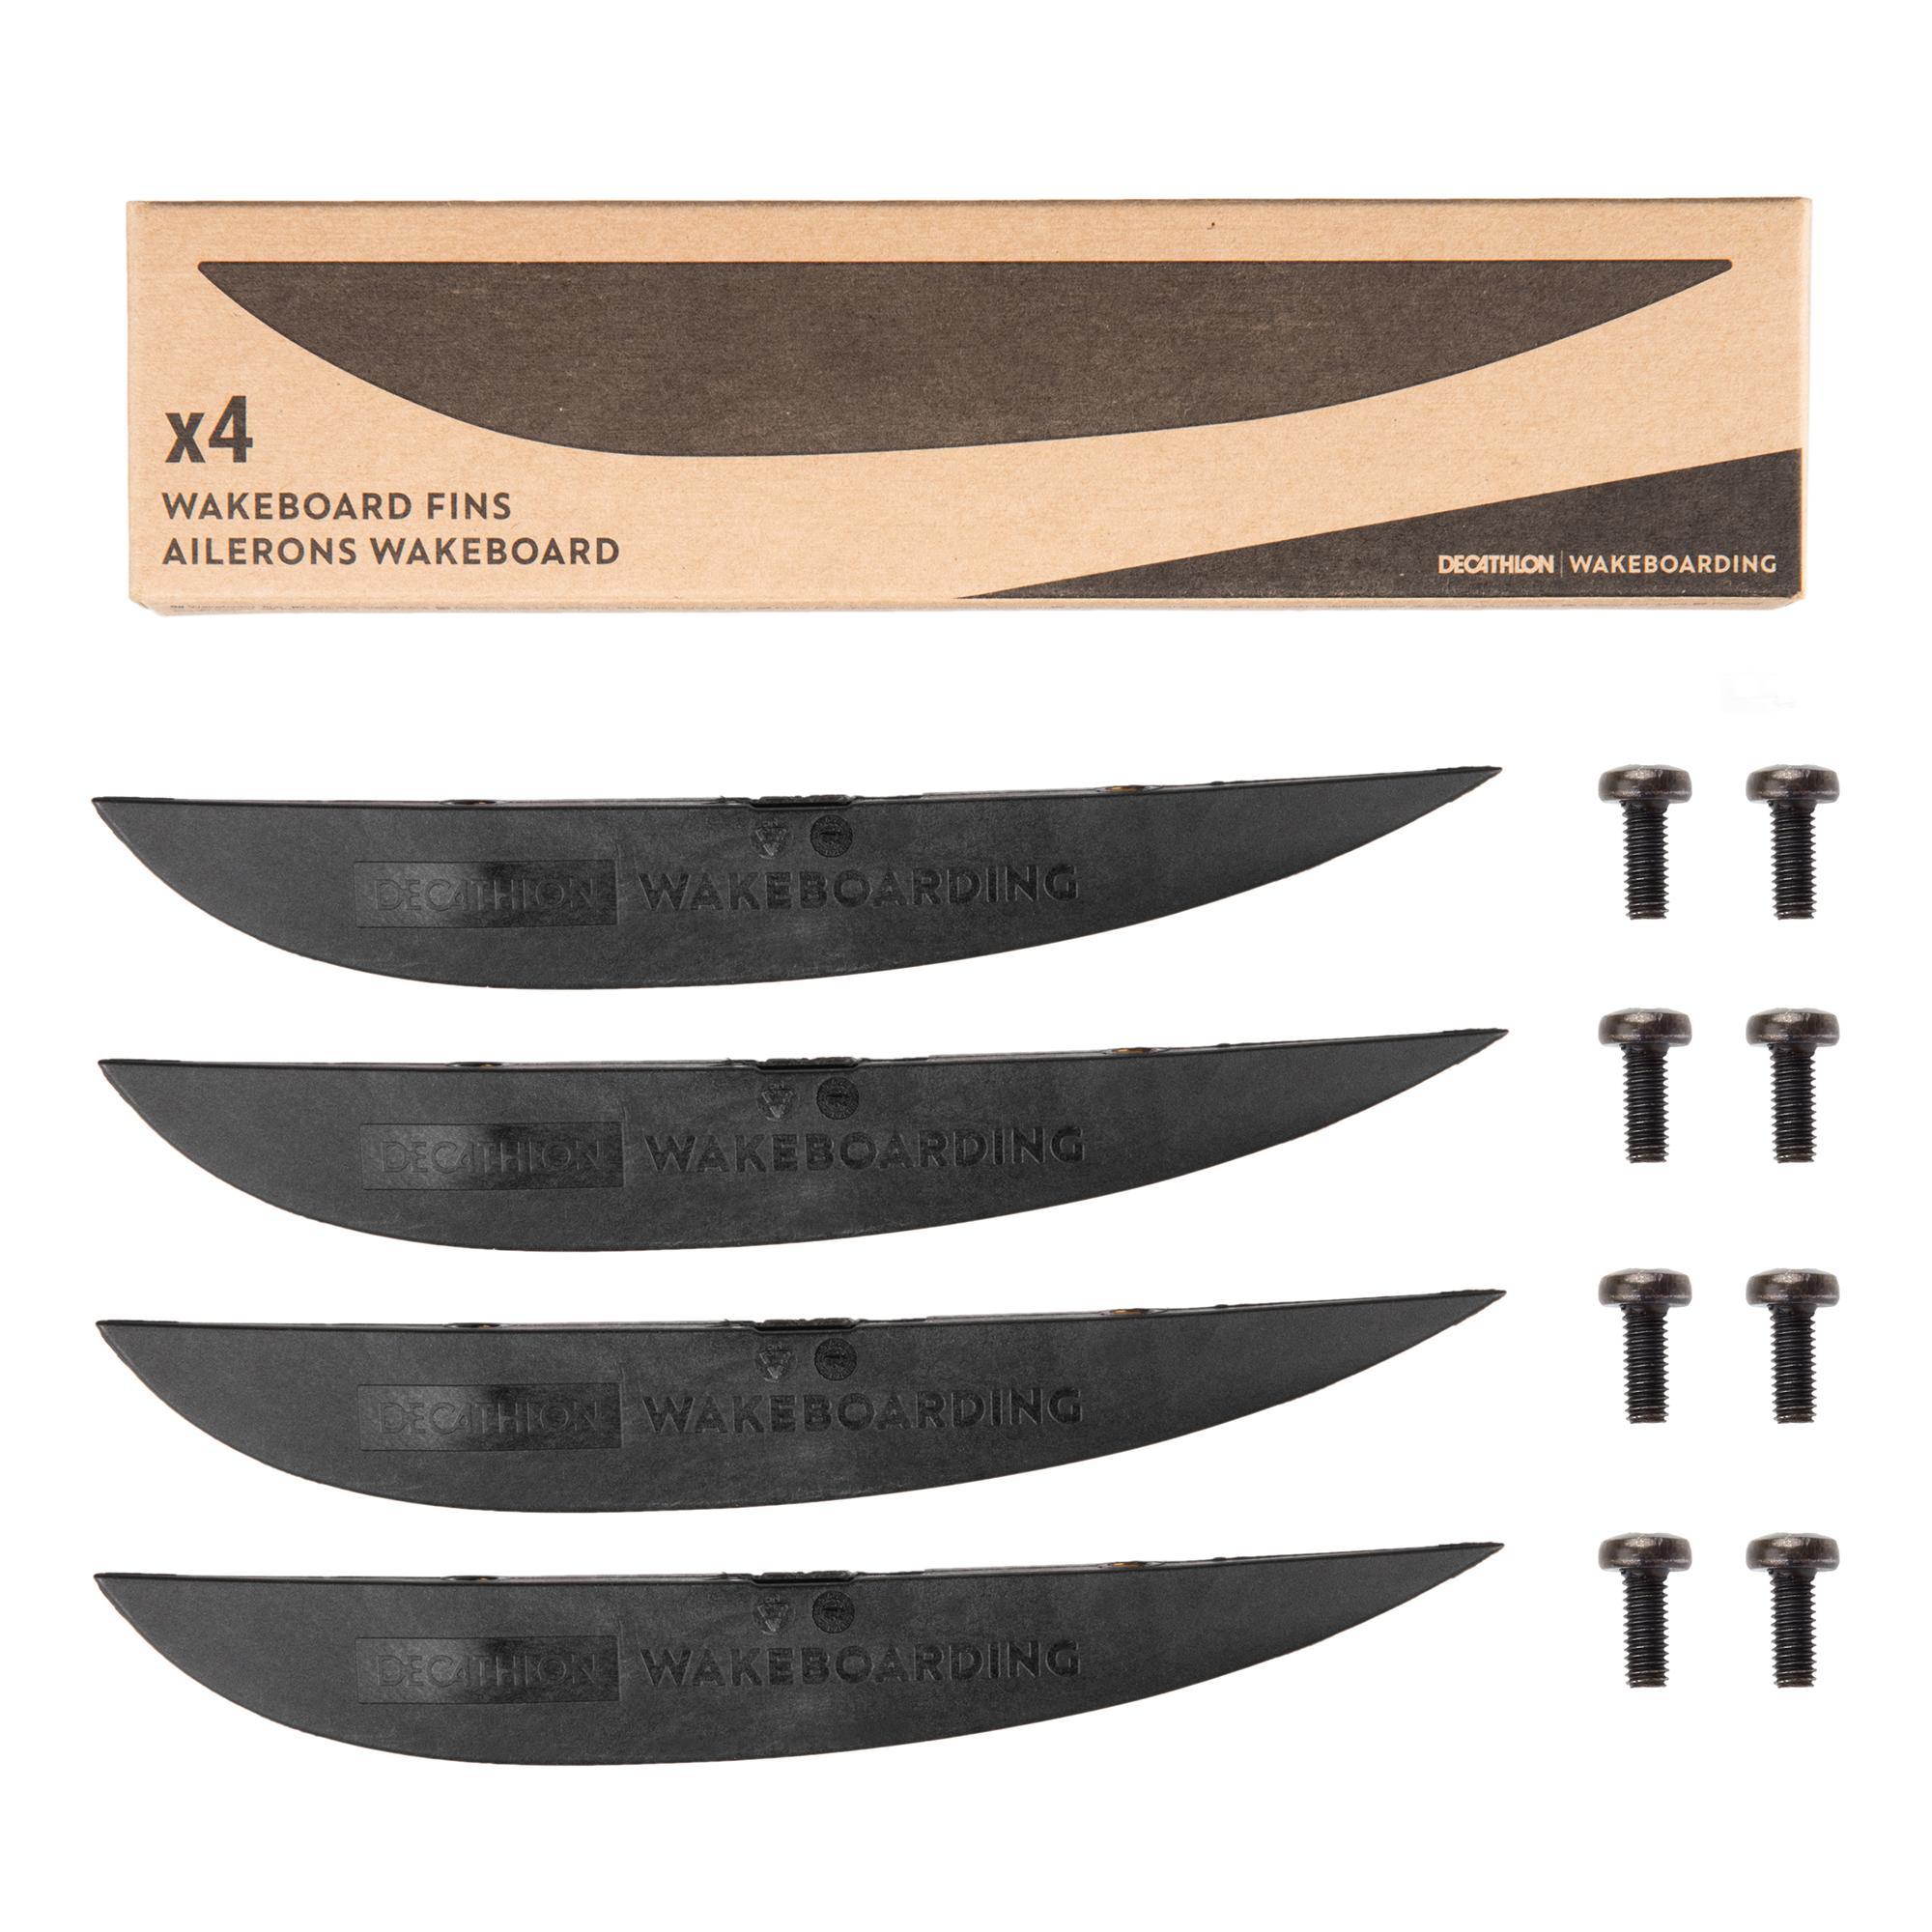 WAKEBOARDING PACK OF 4 WAKEBOARD FINS, 7.6 CM CENTRE DISTANCE